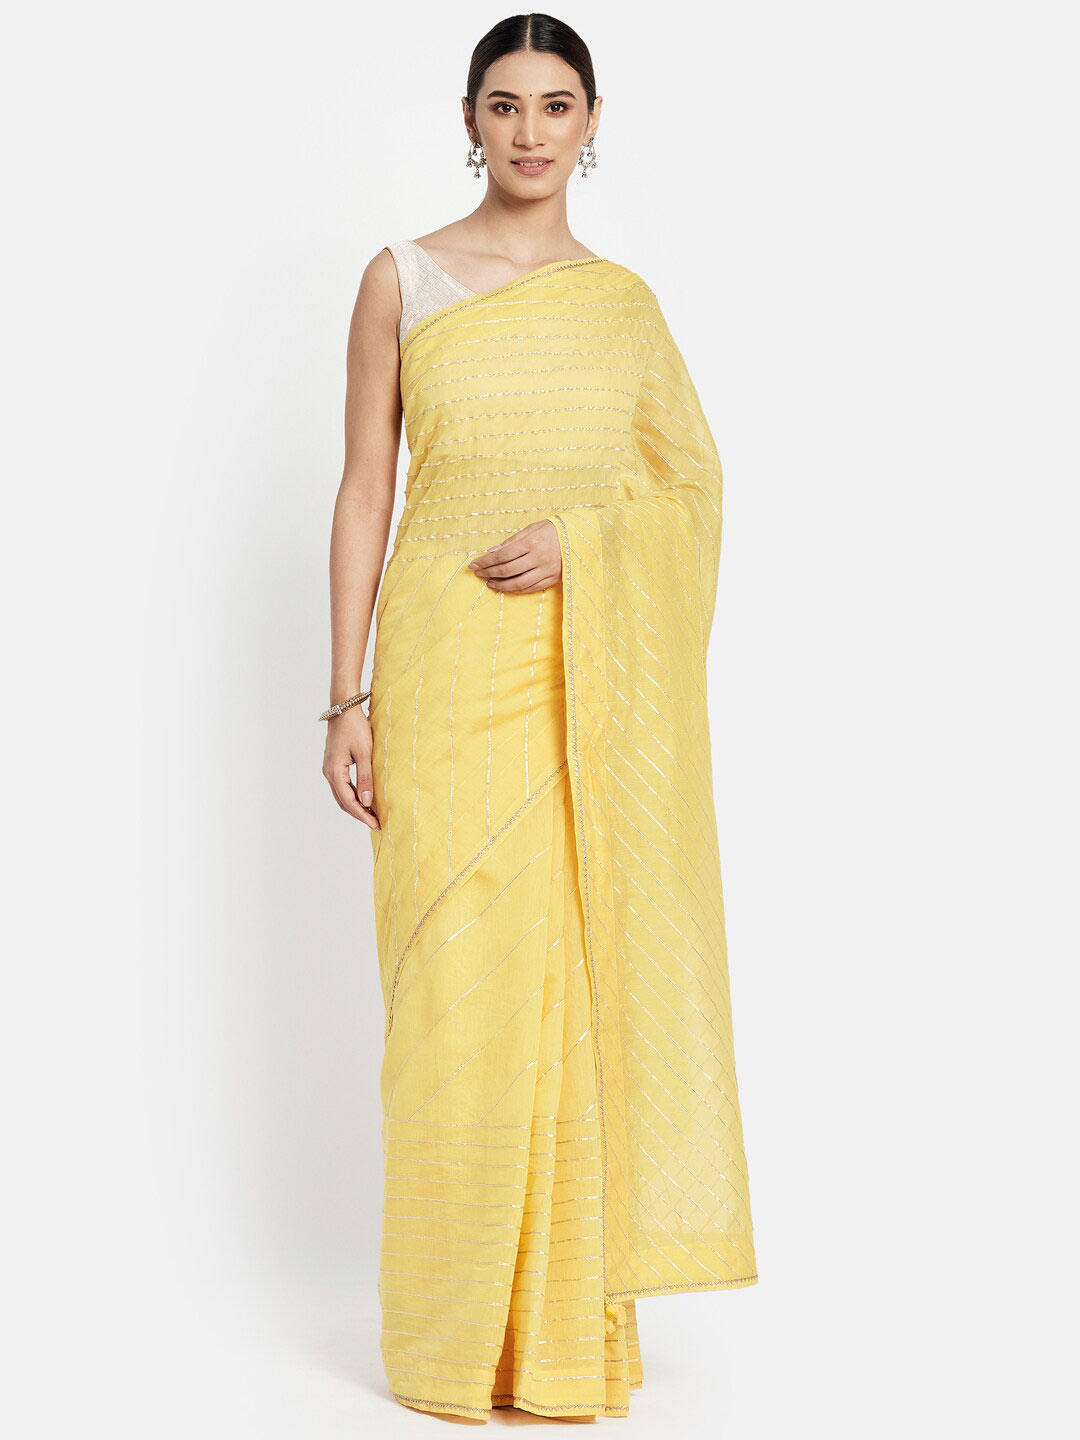 Fabindia Yellow & Gold-Toned Woven Design Embroidered Ready to Wear Saree Price in India